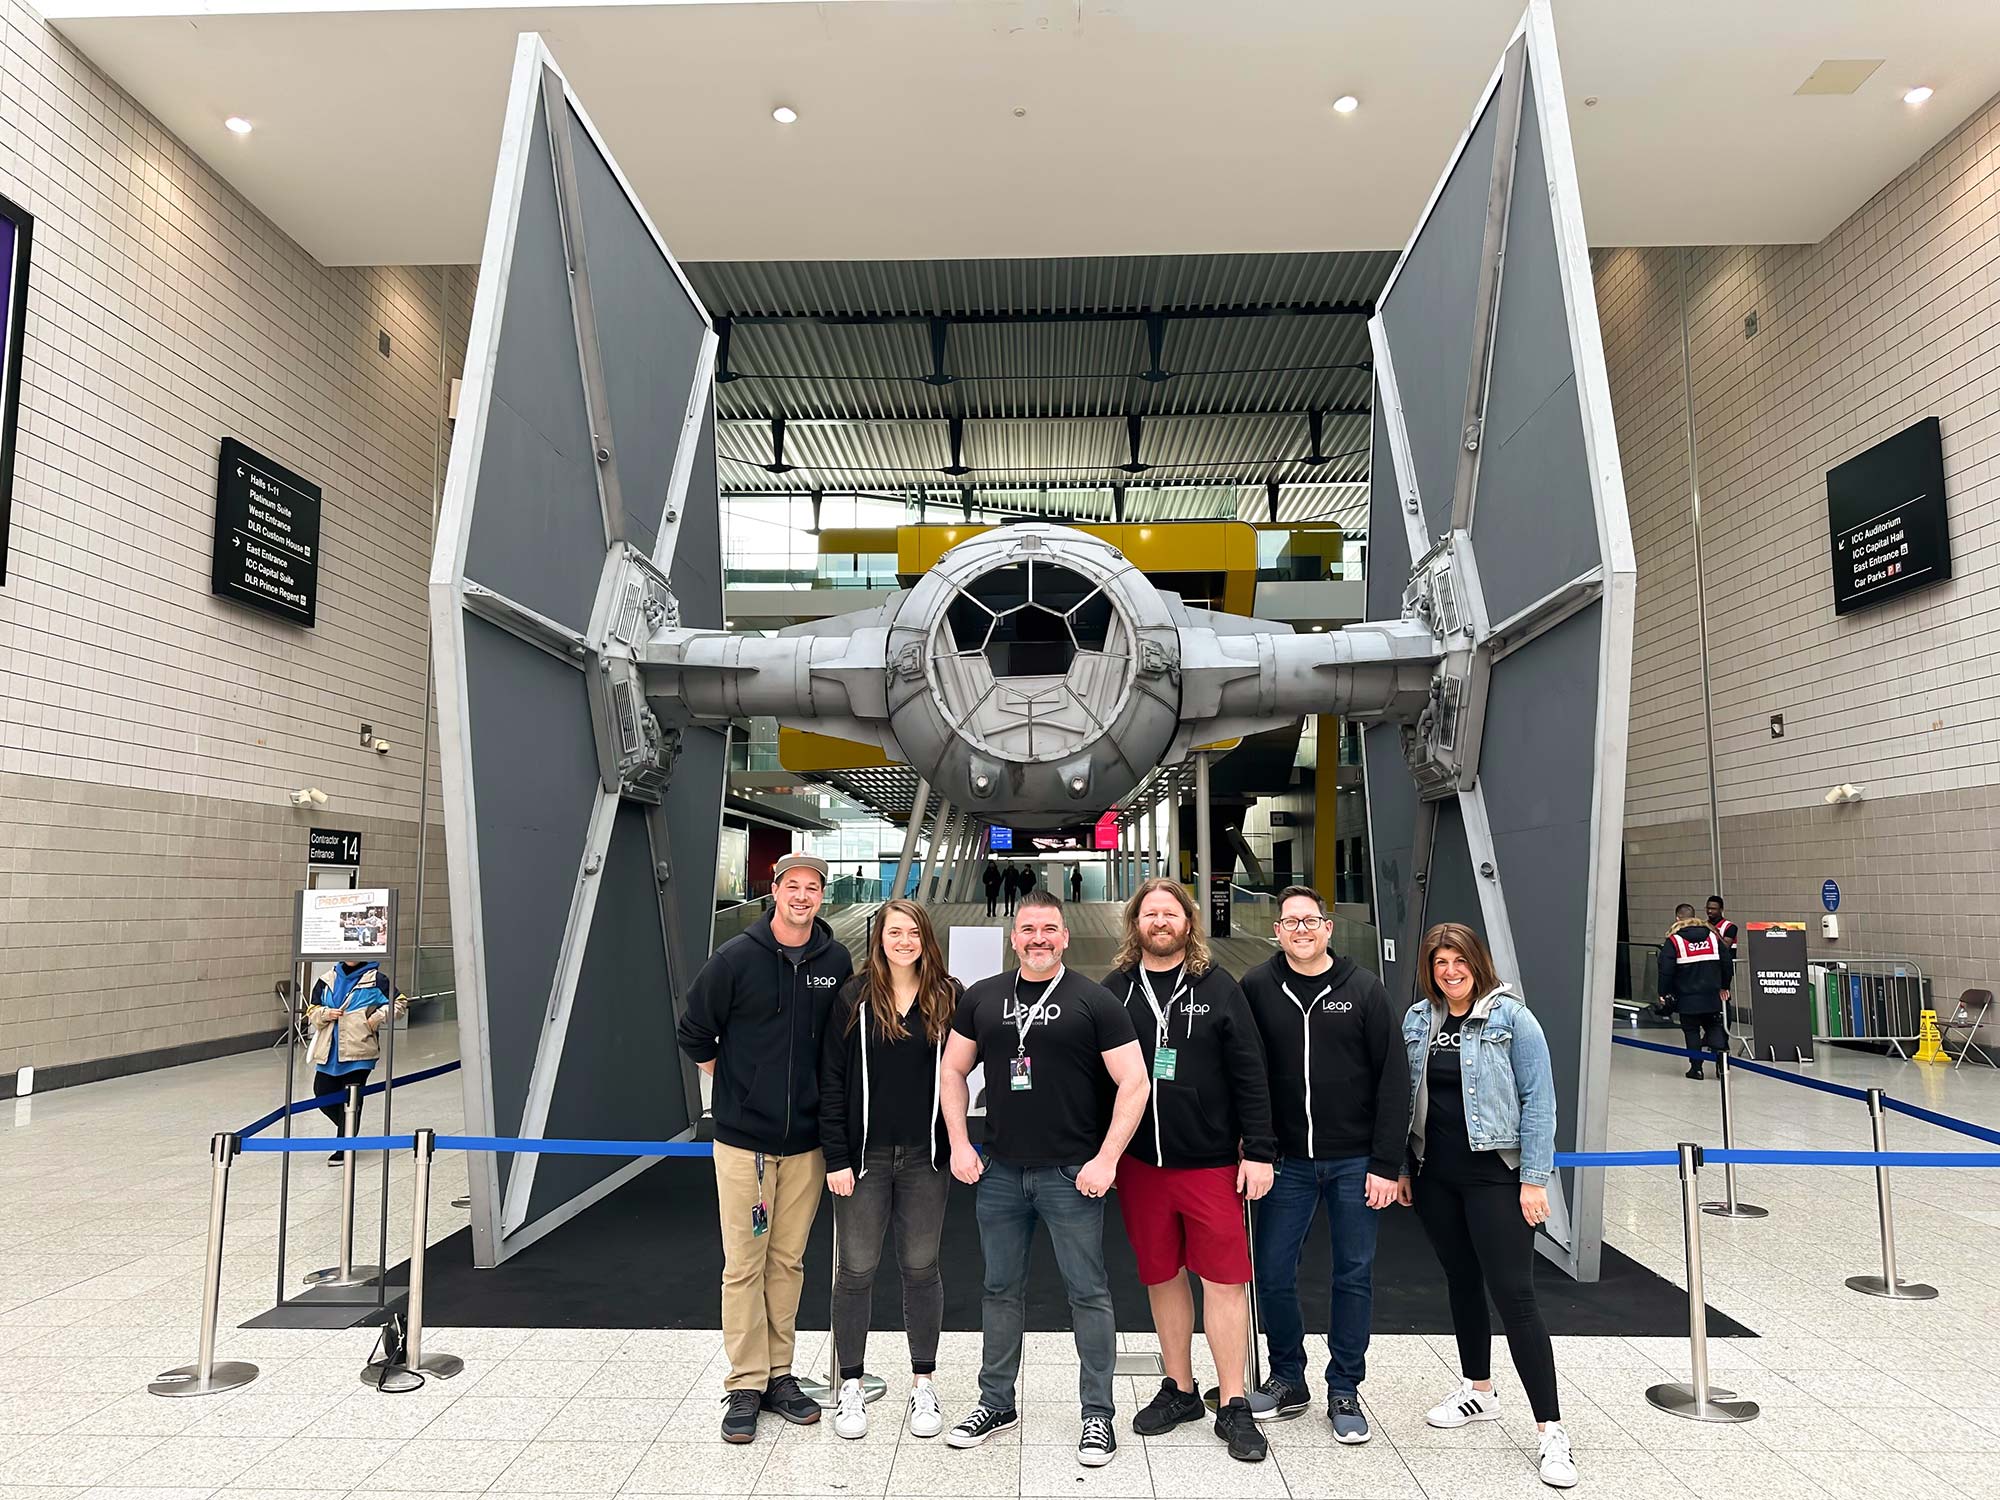 A group of Leap employees in front of a TIE fighter at a Star Wars event